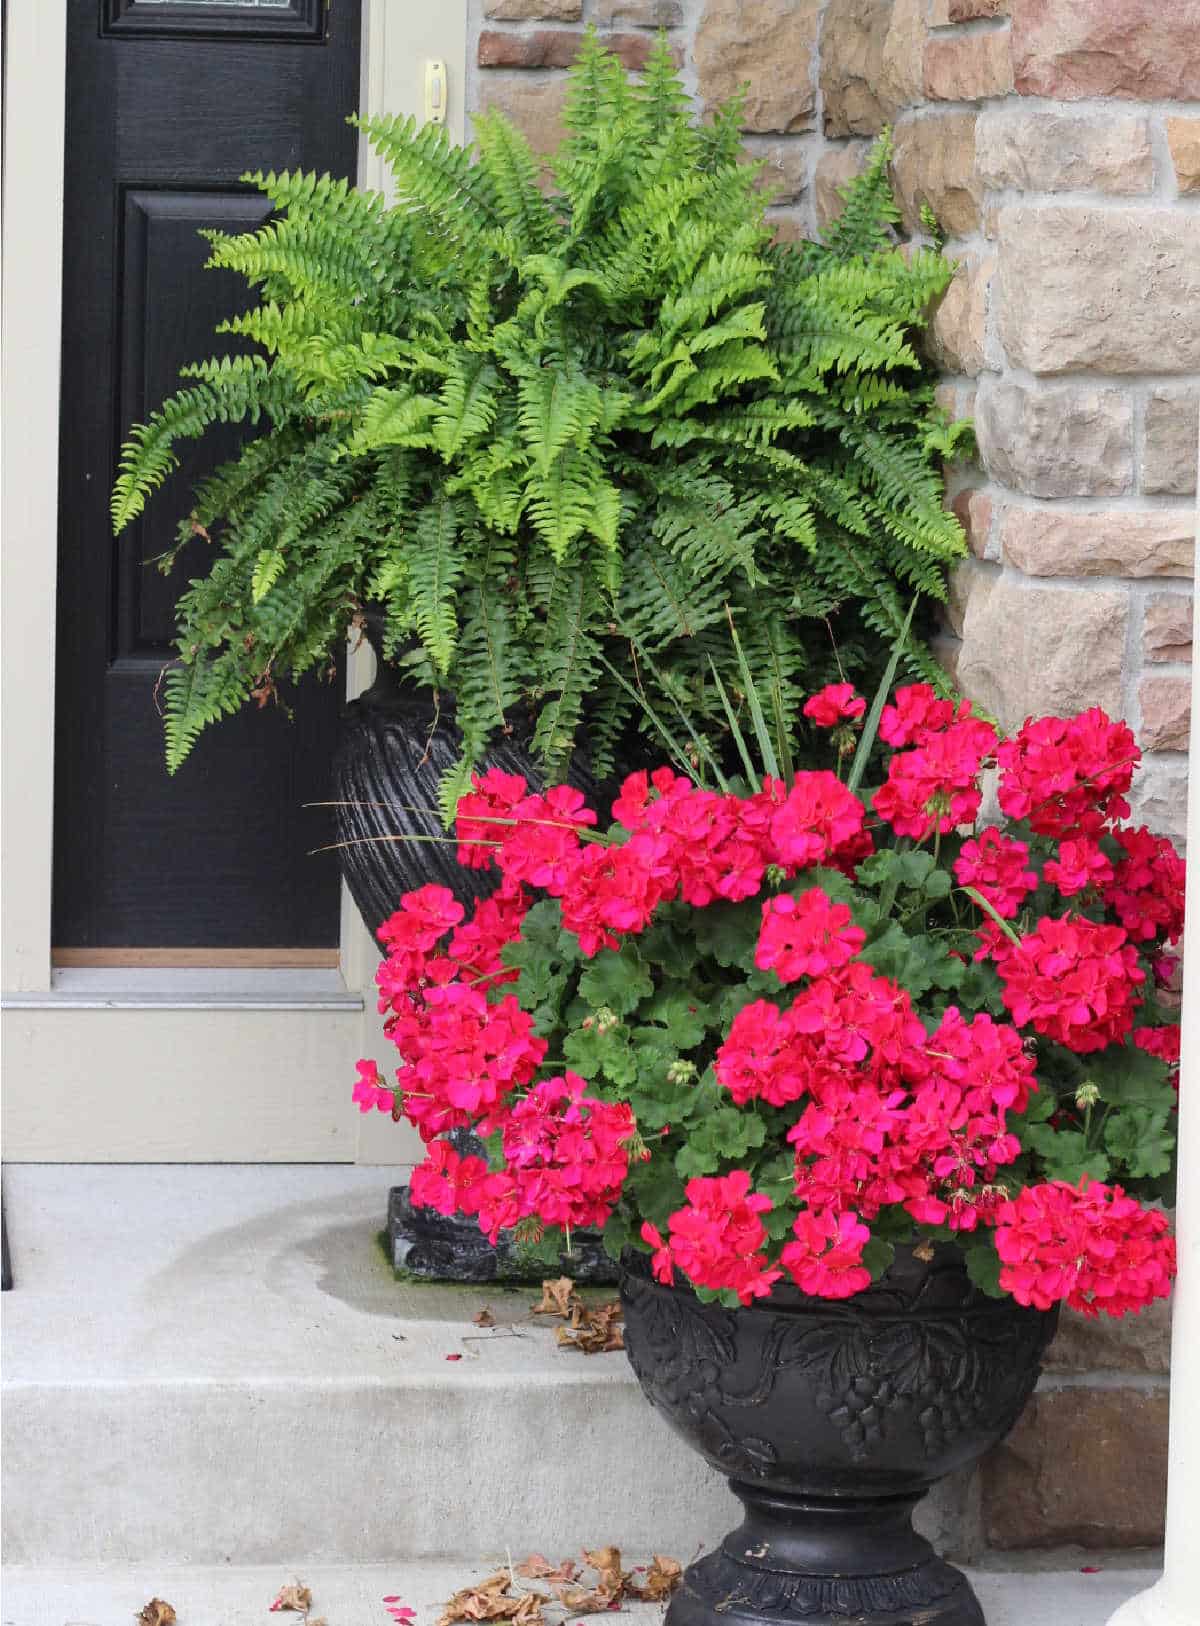 red pot of geraniums in front of a fern planter